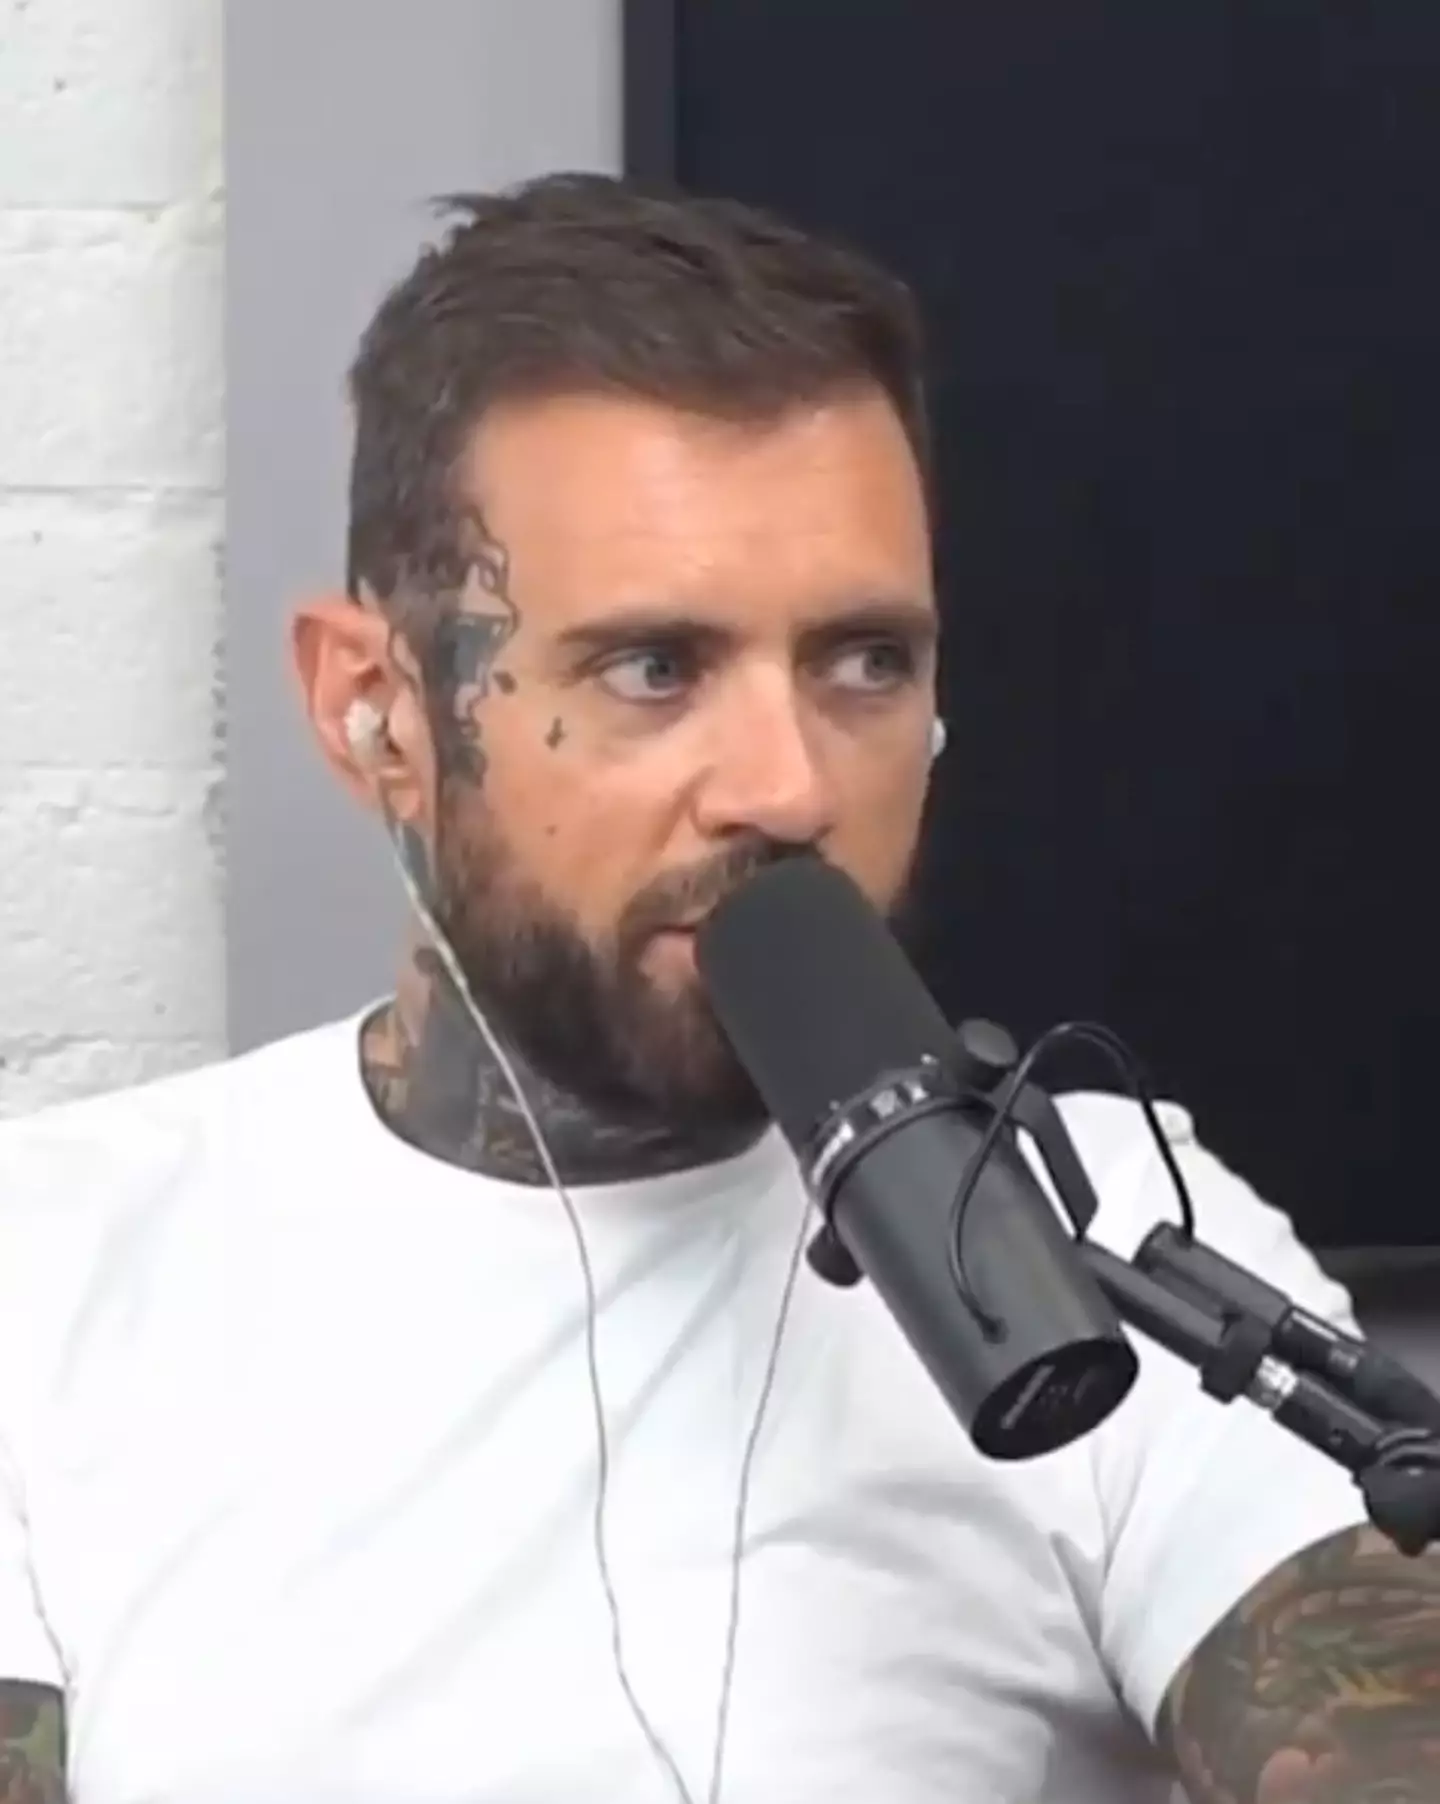 Adam22 says he would have been 'insane' to stand in his wife's way.